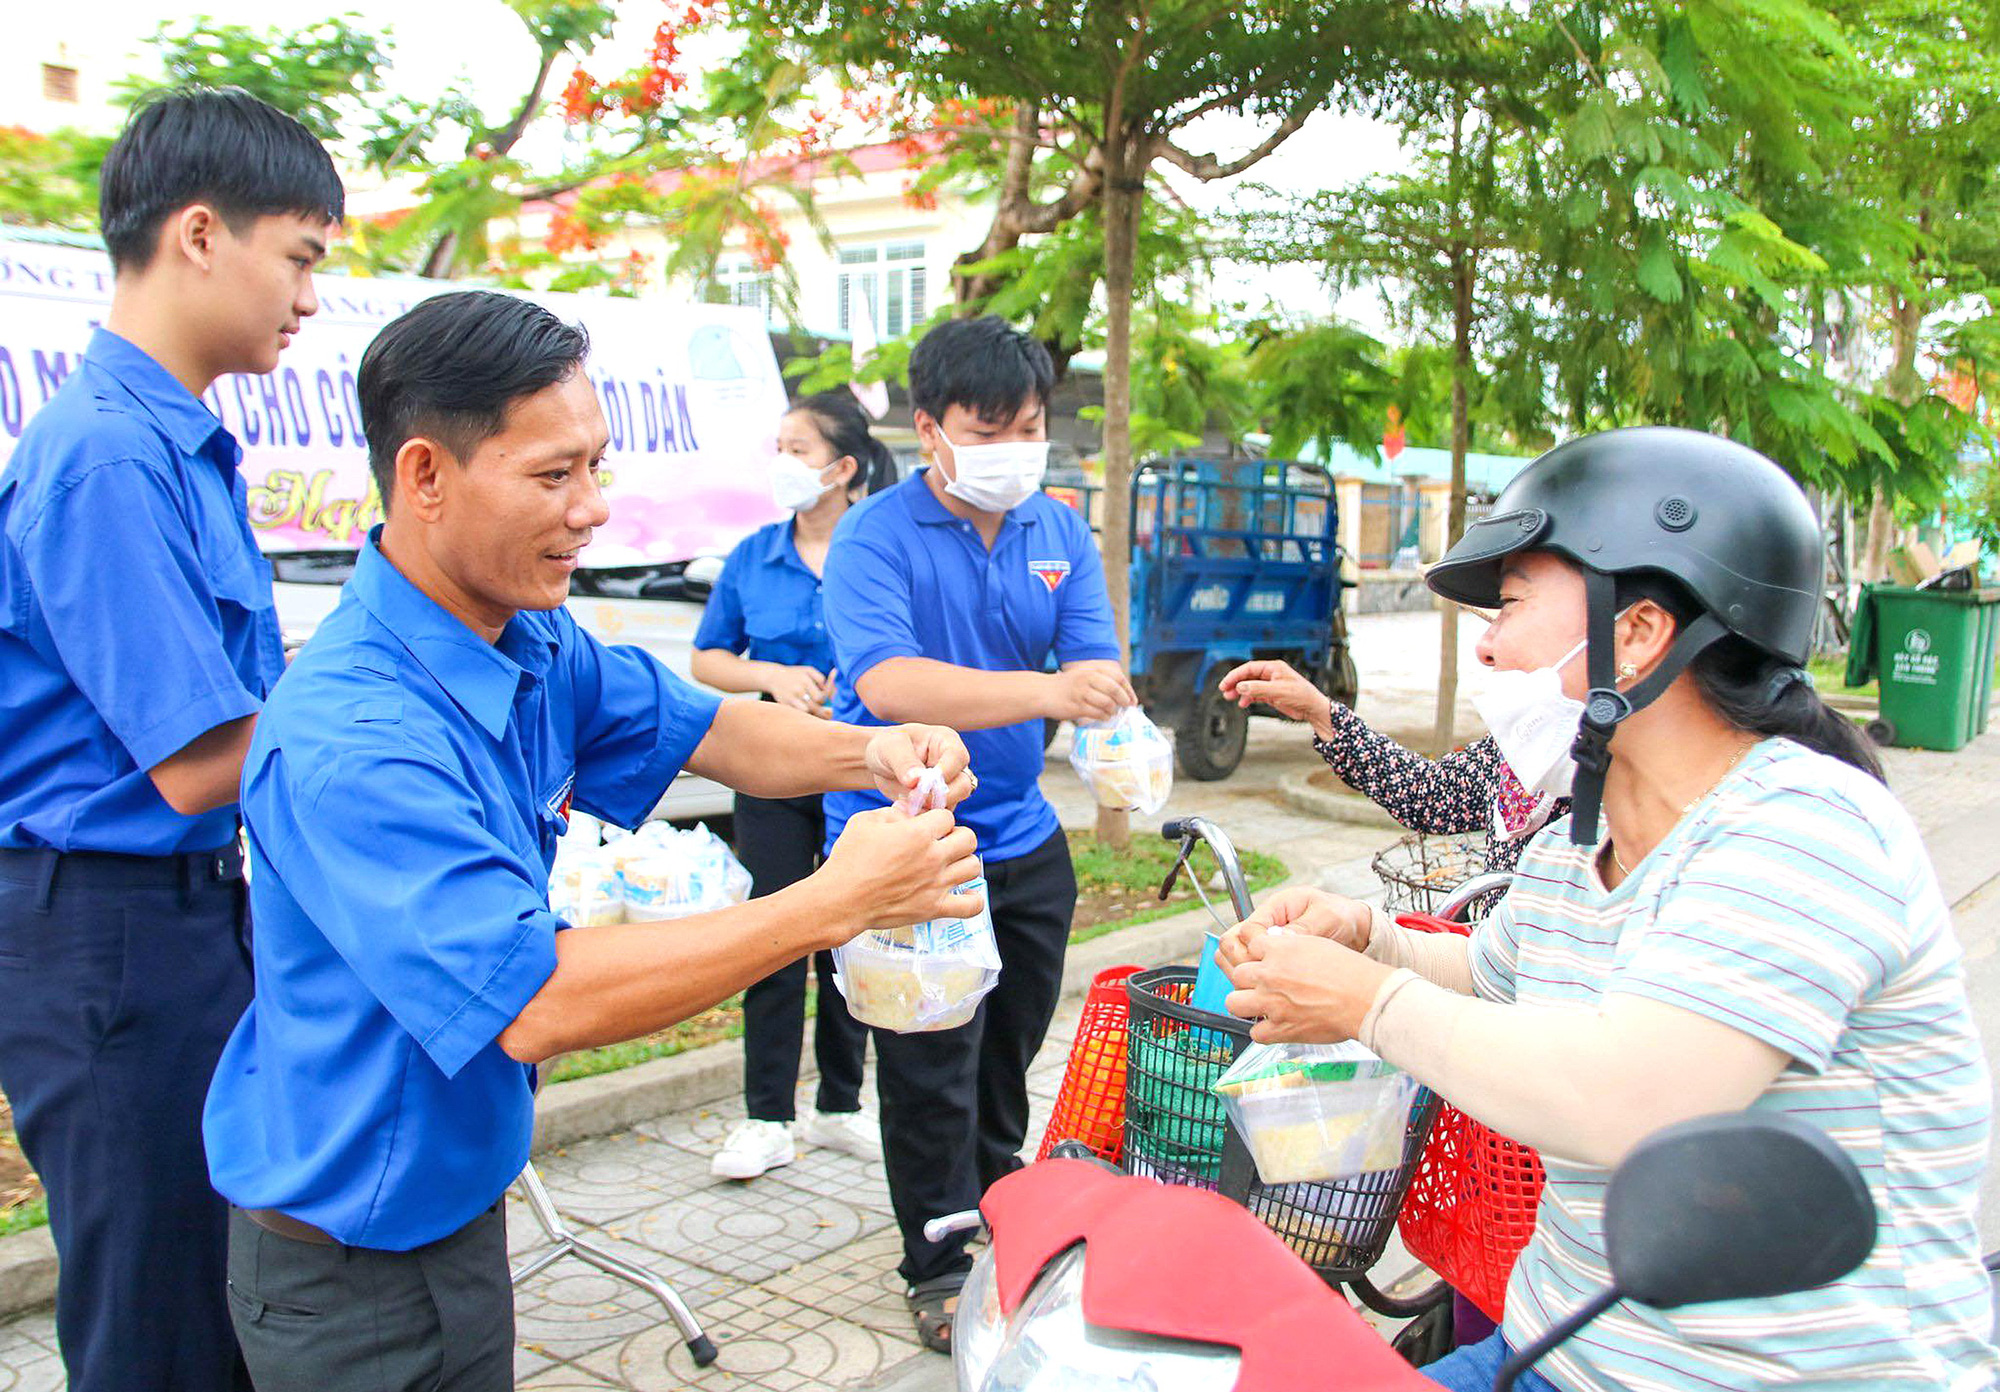 Mr Thanh and several youth association members distribute free food to the poor, this work is done once a month and has been continuing for many years - Photo: TRAN MAI